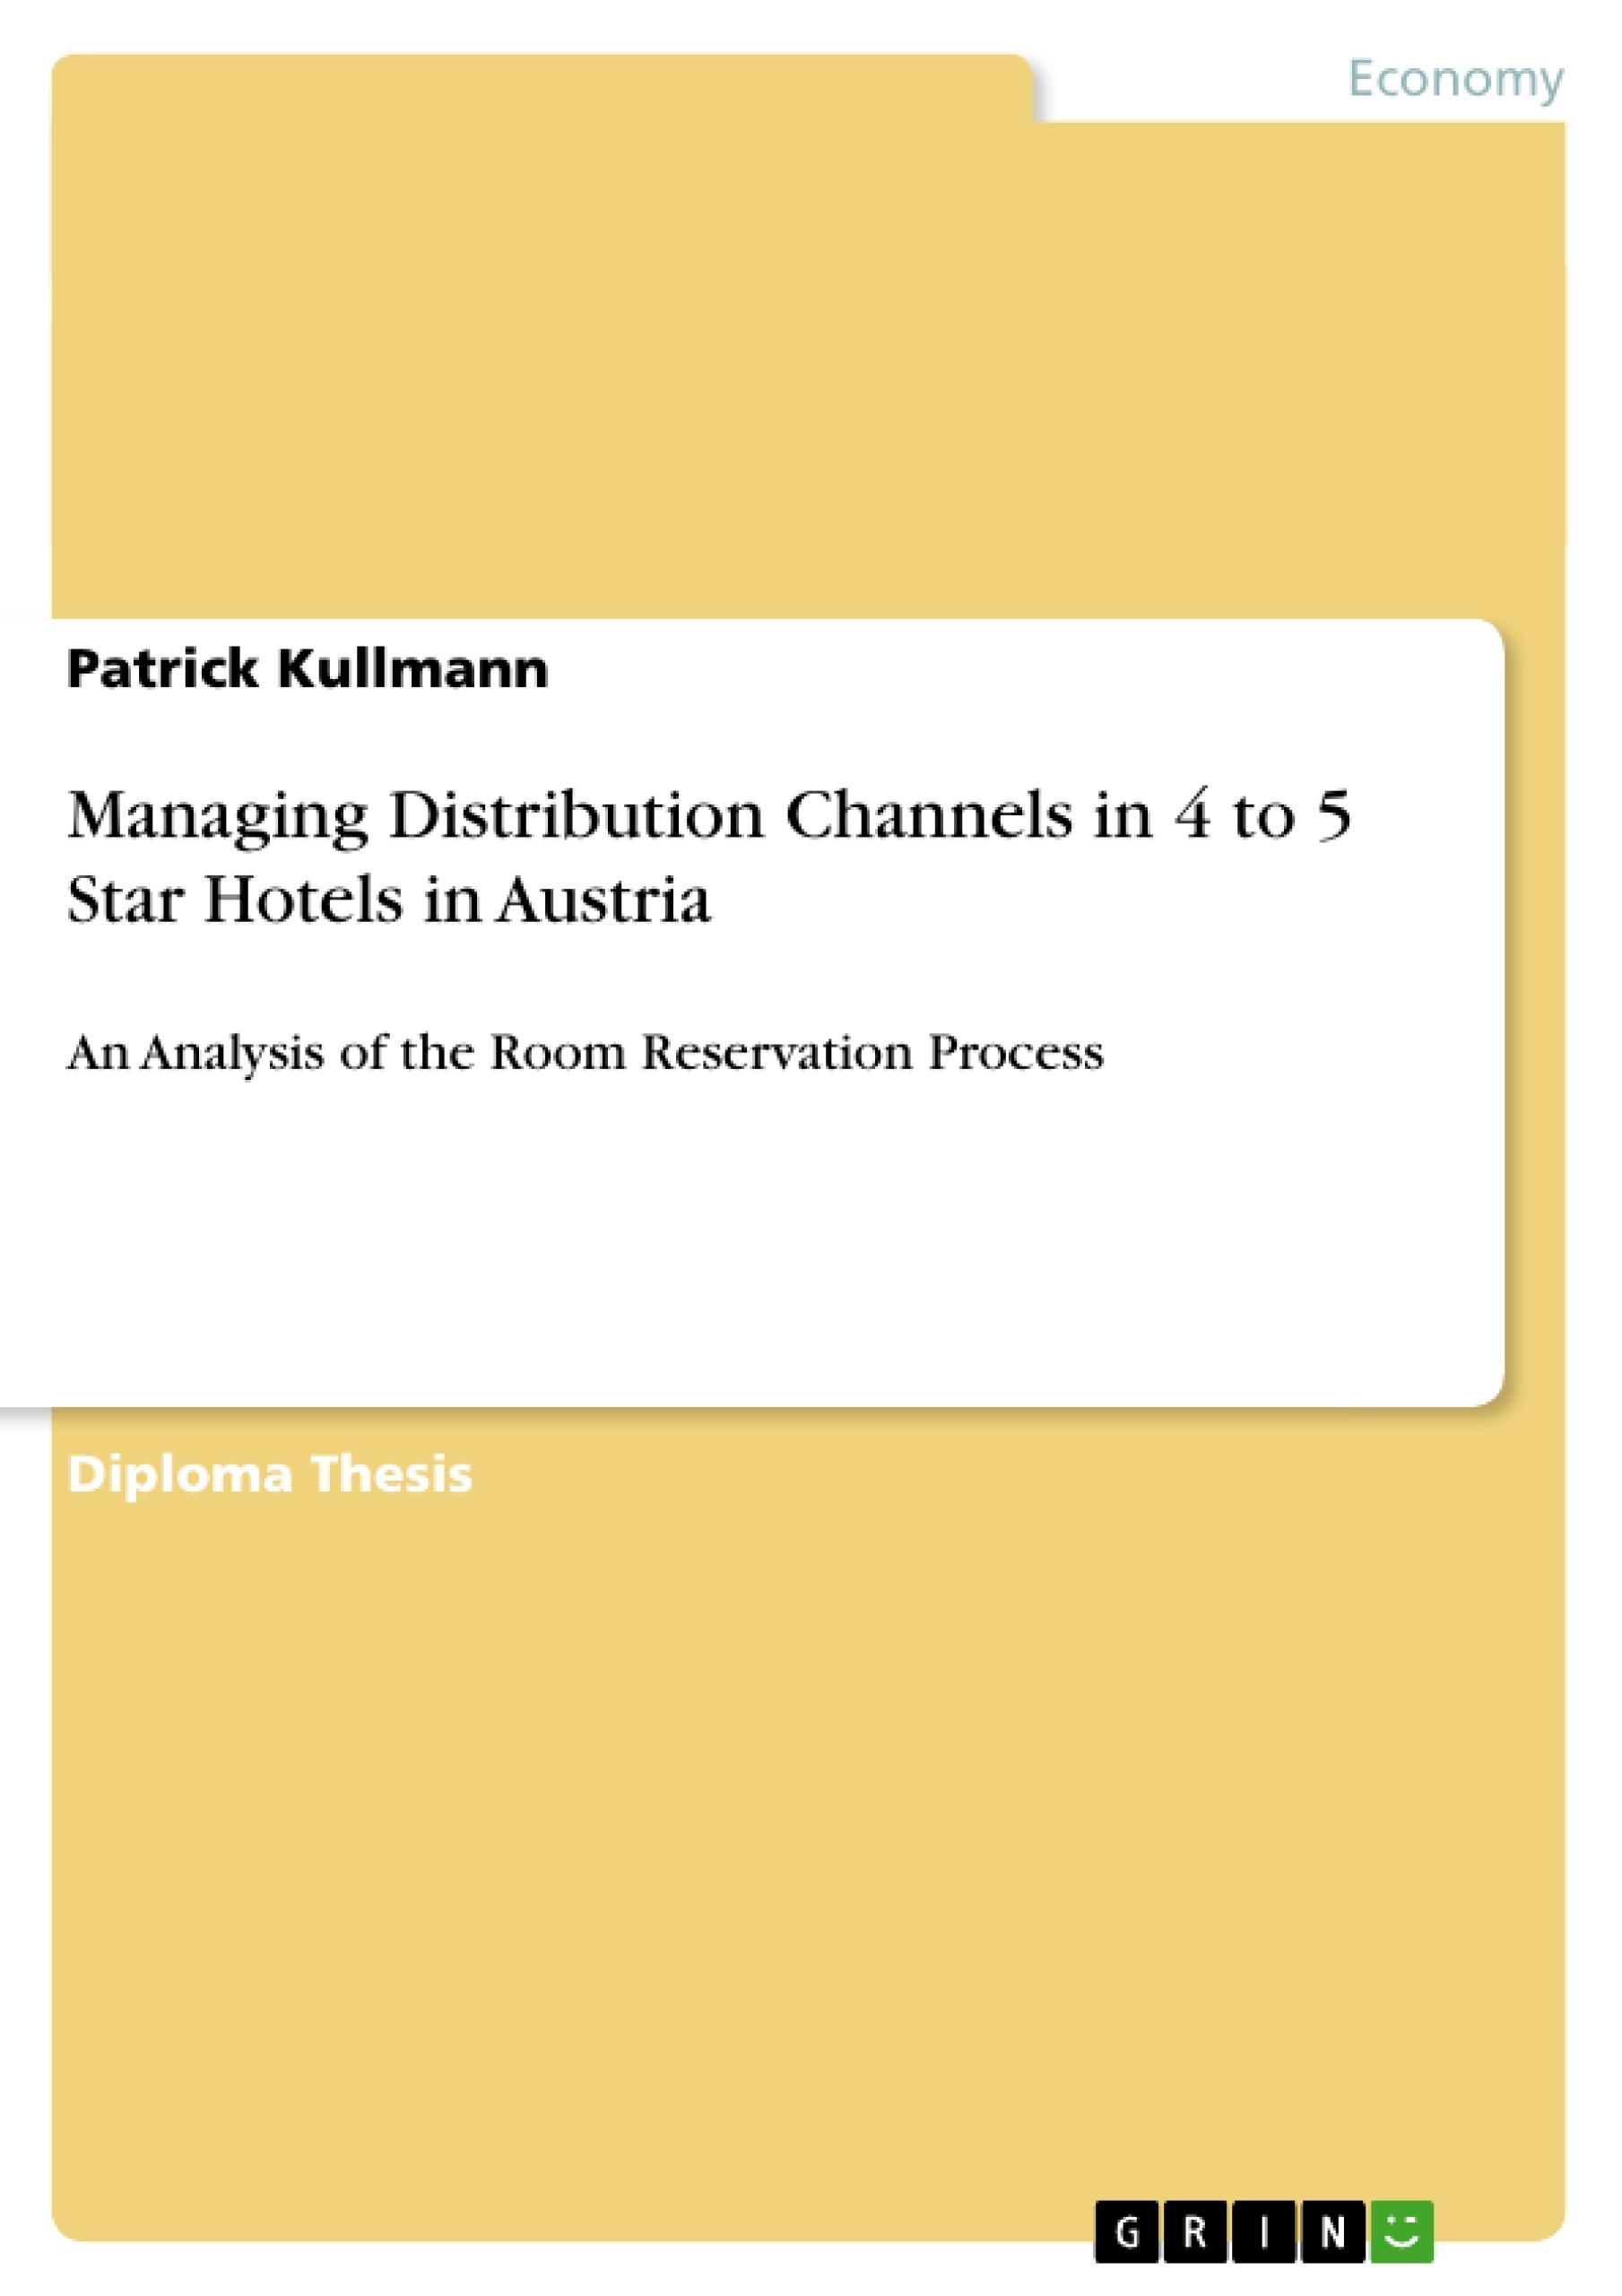 Title: Managing Distribution Channels in 4 to 5 Star Hotels in Austria